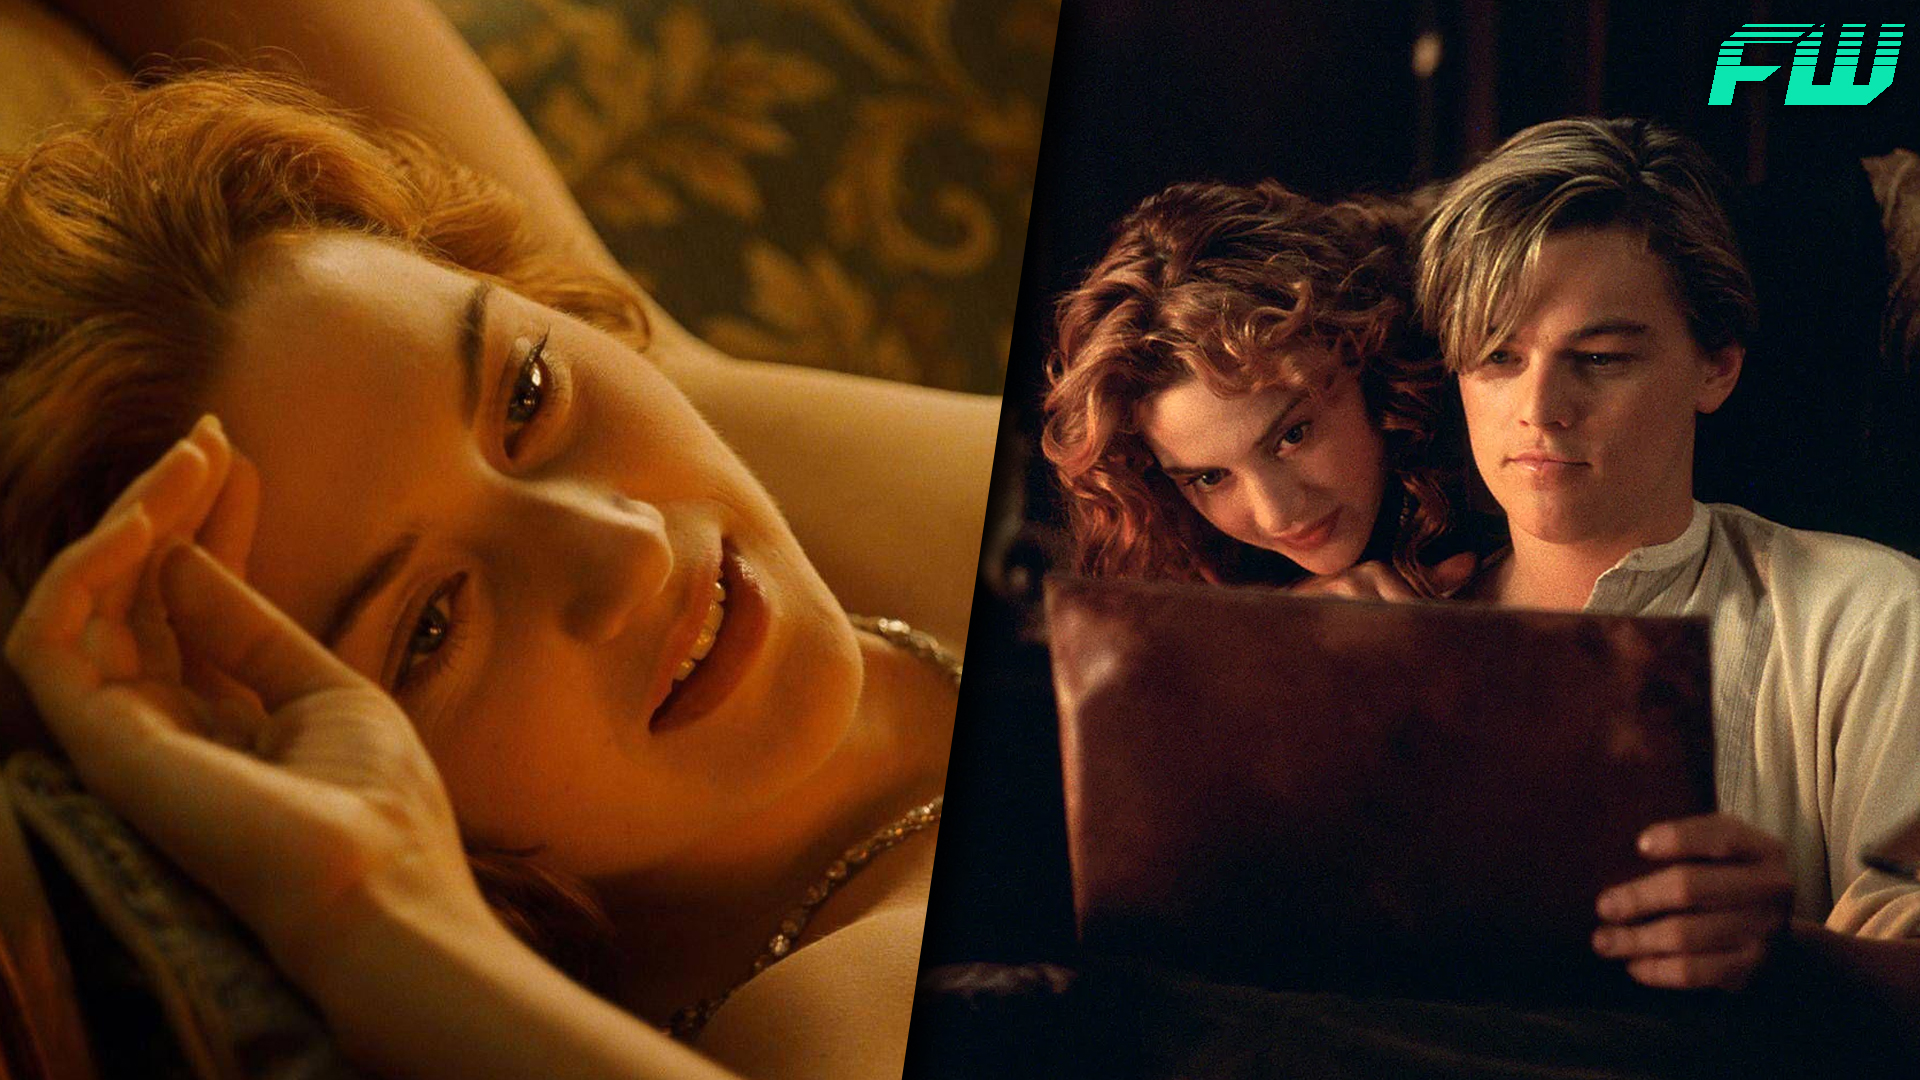 25 Facts About The Movie Titanic That Will Make You See It In A Different Light